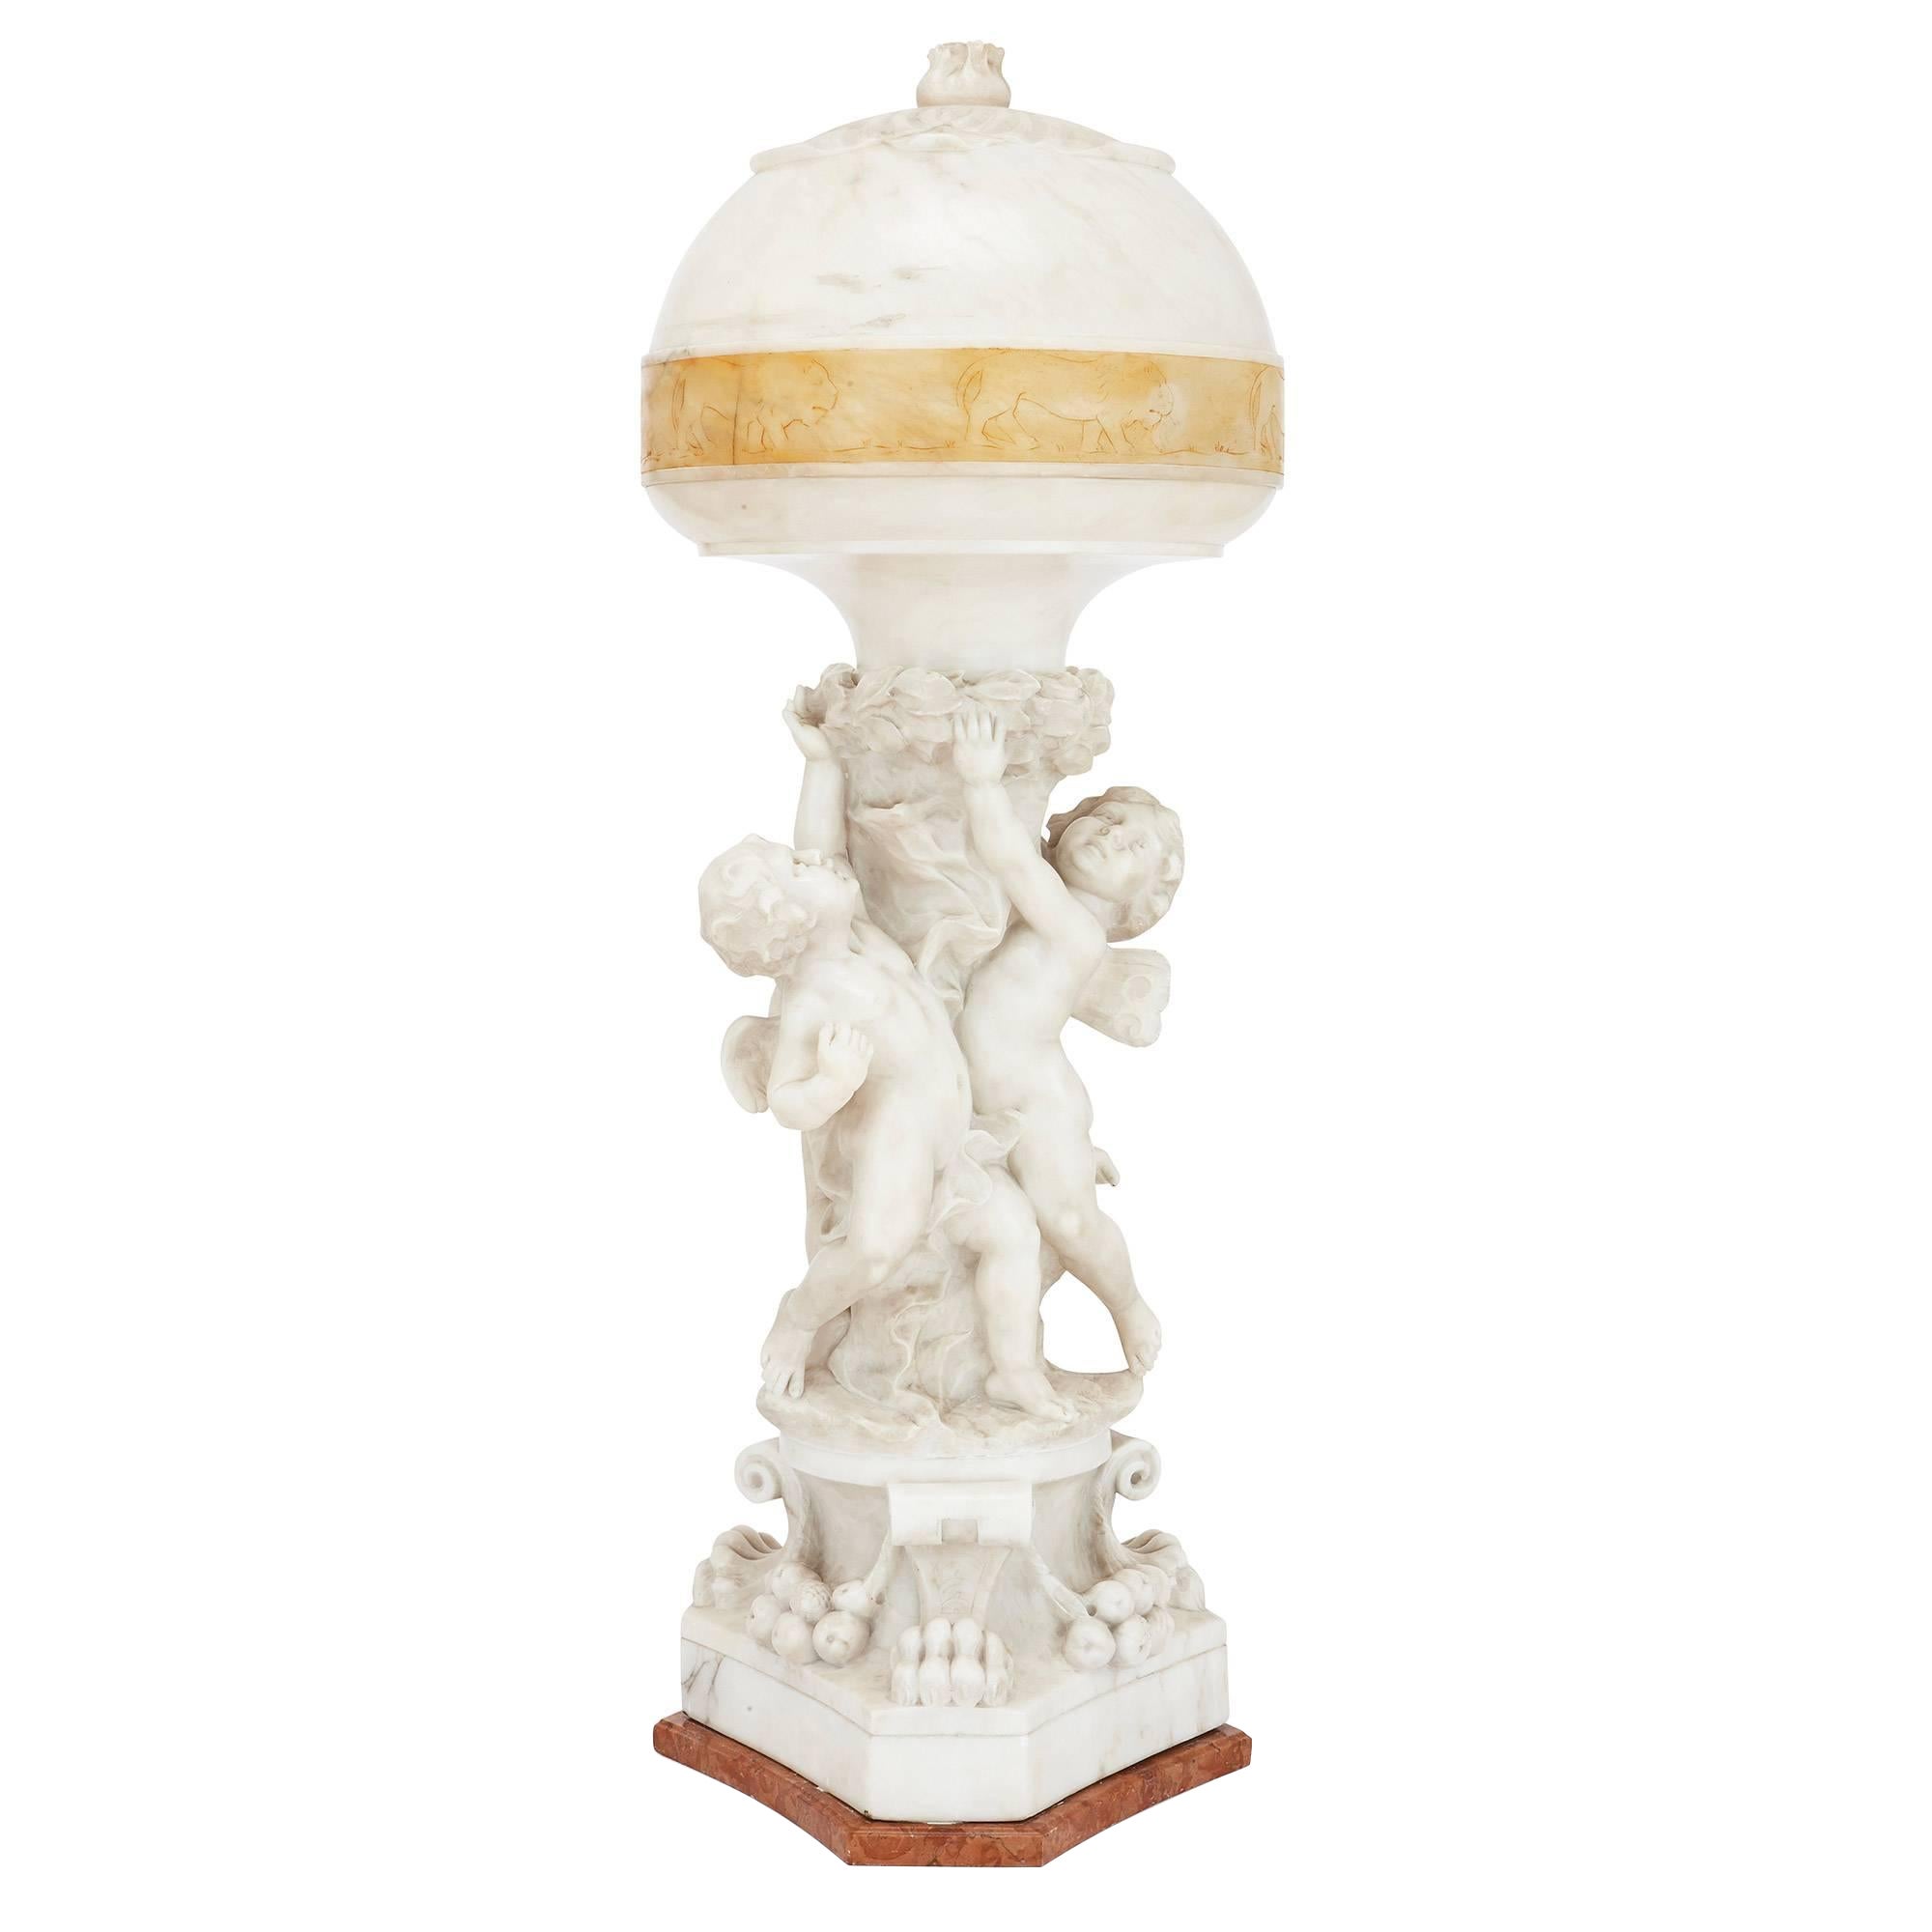 Italian Neoclassical Style Alabaster and Marble Lamp